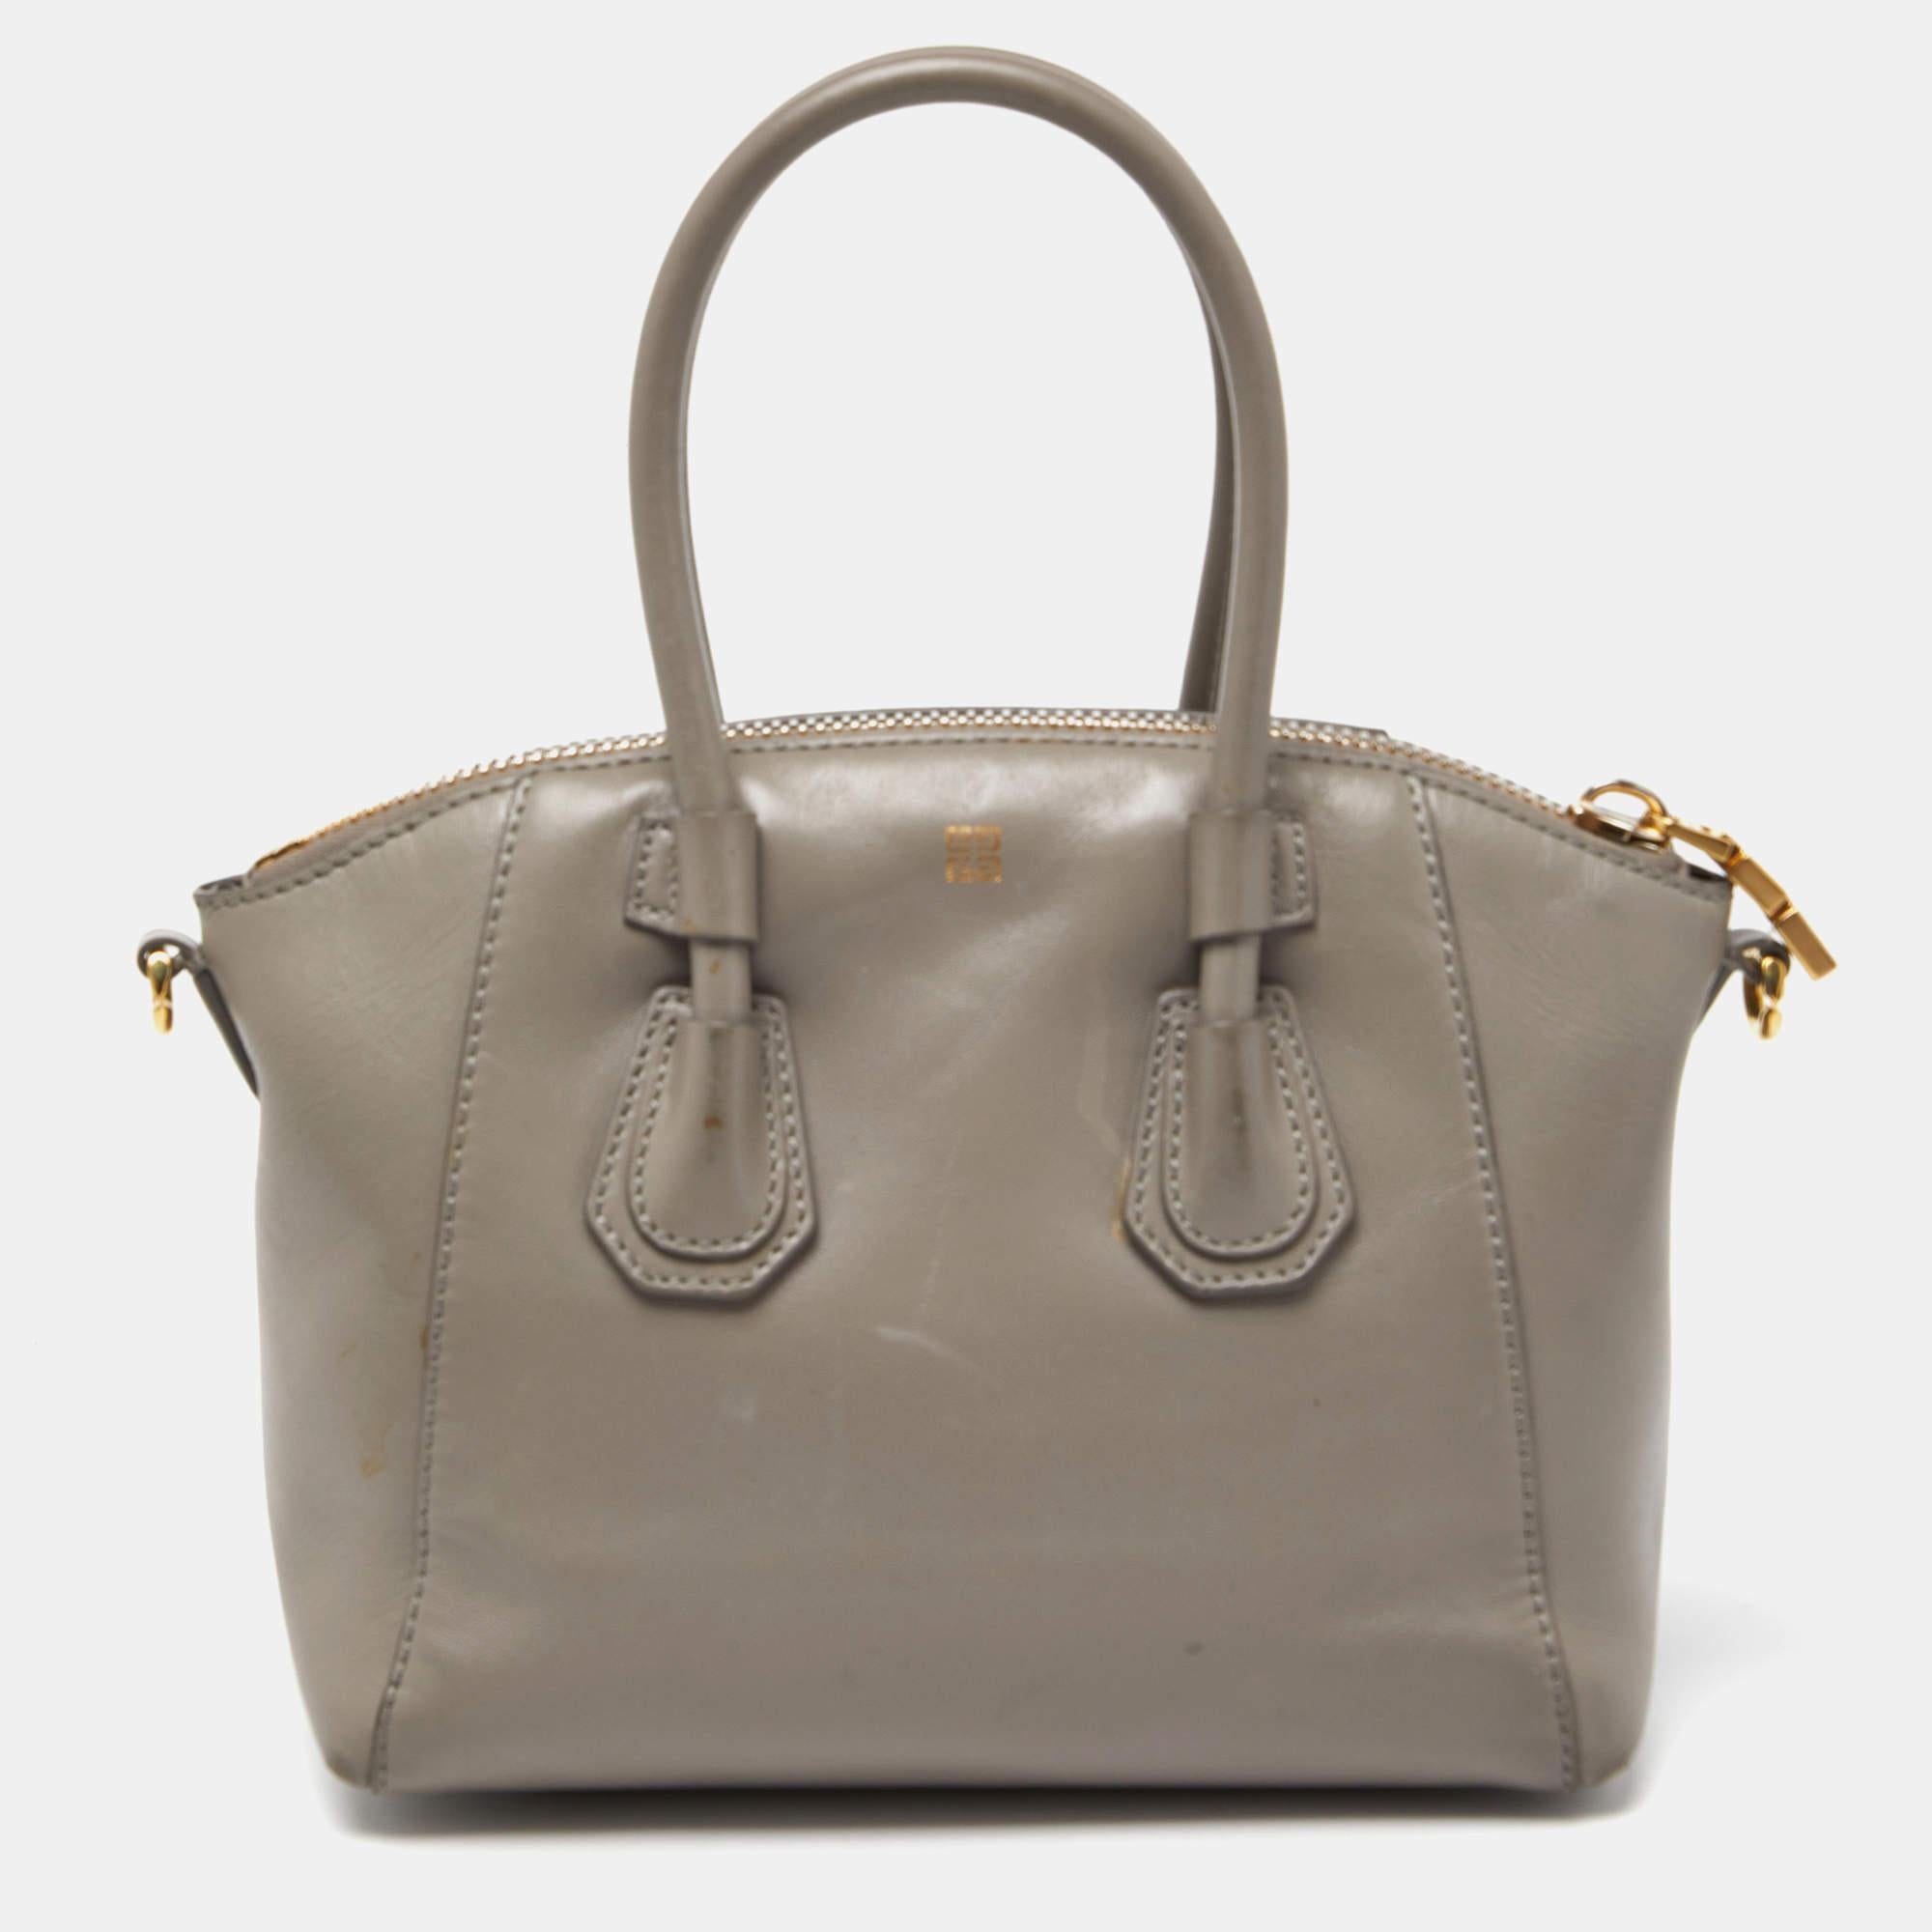 A classic handbag comes with the promise of enduring appeal, boosting your style time and again. This Givenchy Antigona bag is one such creation. It’s a fine purchase.

Includes: Original Dustbag, Detachable Strap

